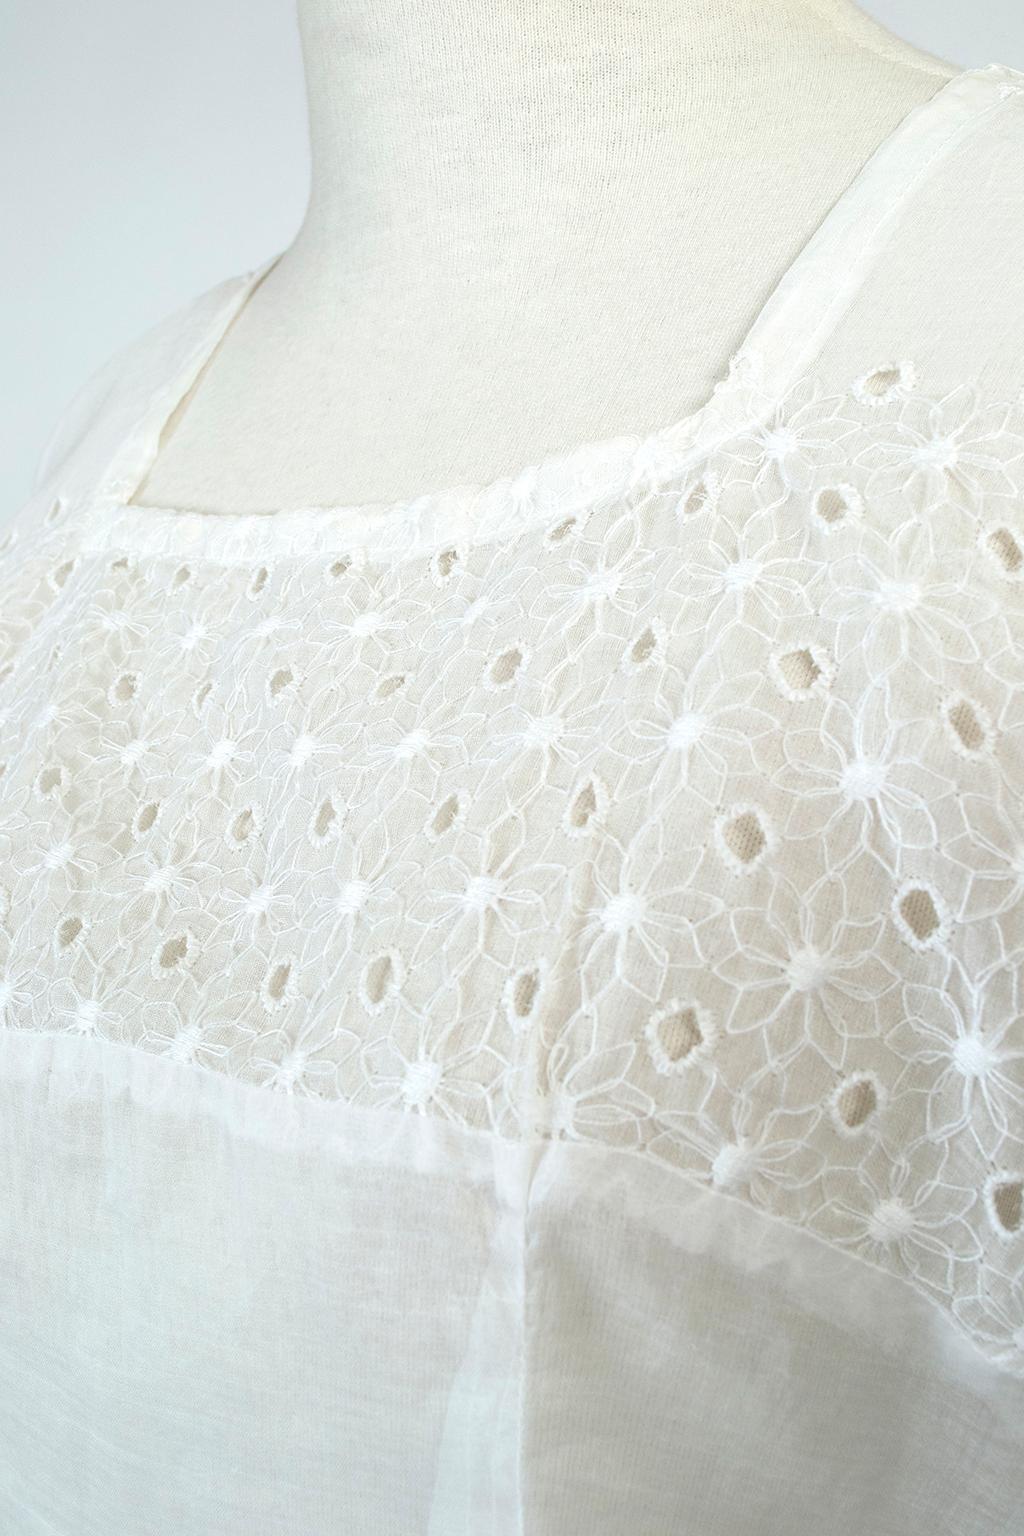 Edwardian Sheer White Organdy Eyelet Cap Sleeve Blouse w Square Neck  – S, 1910s For Sale 4